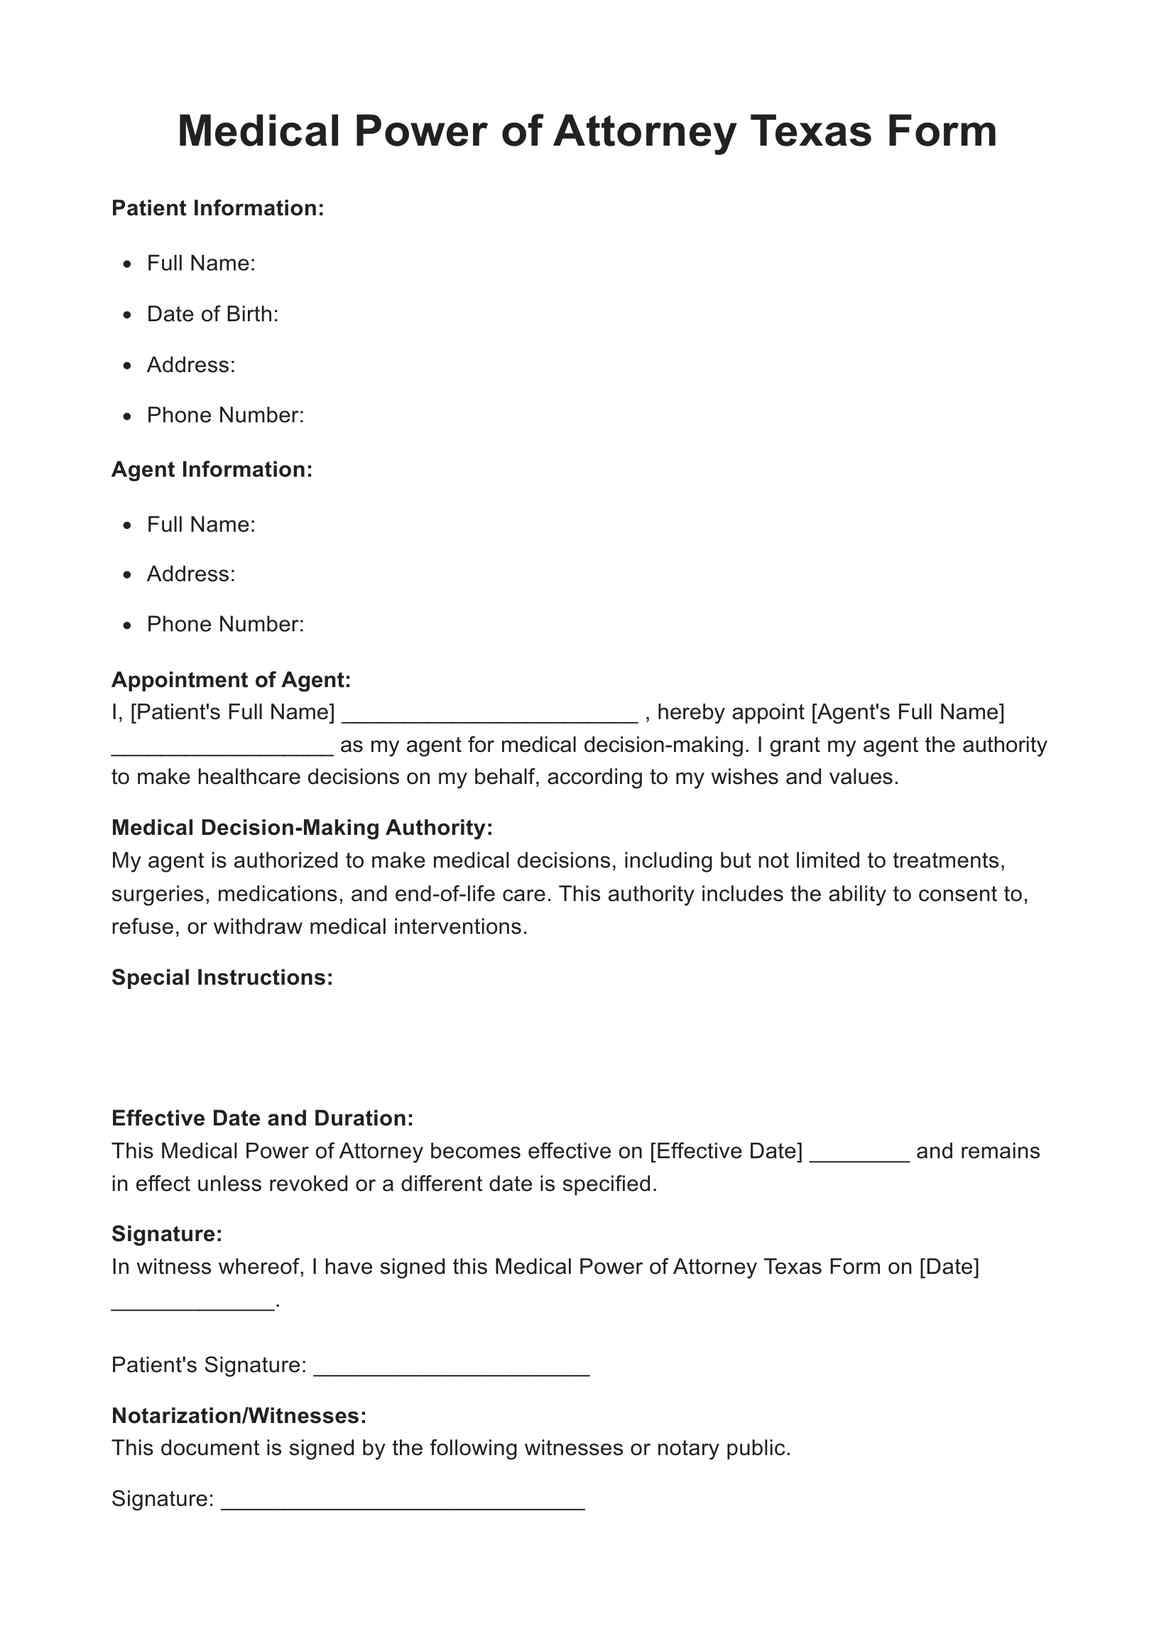 Medical Power Of Attorney Texas Form PDF Example